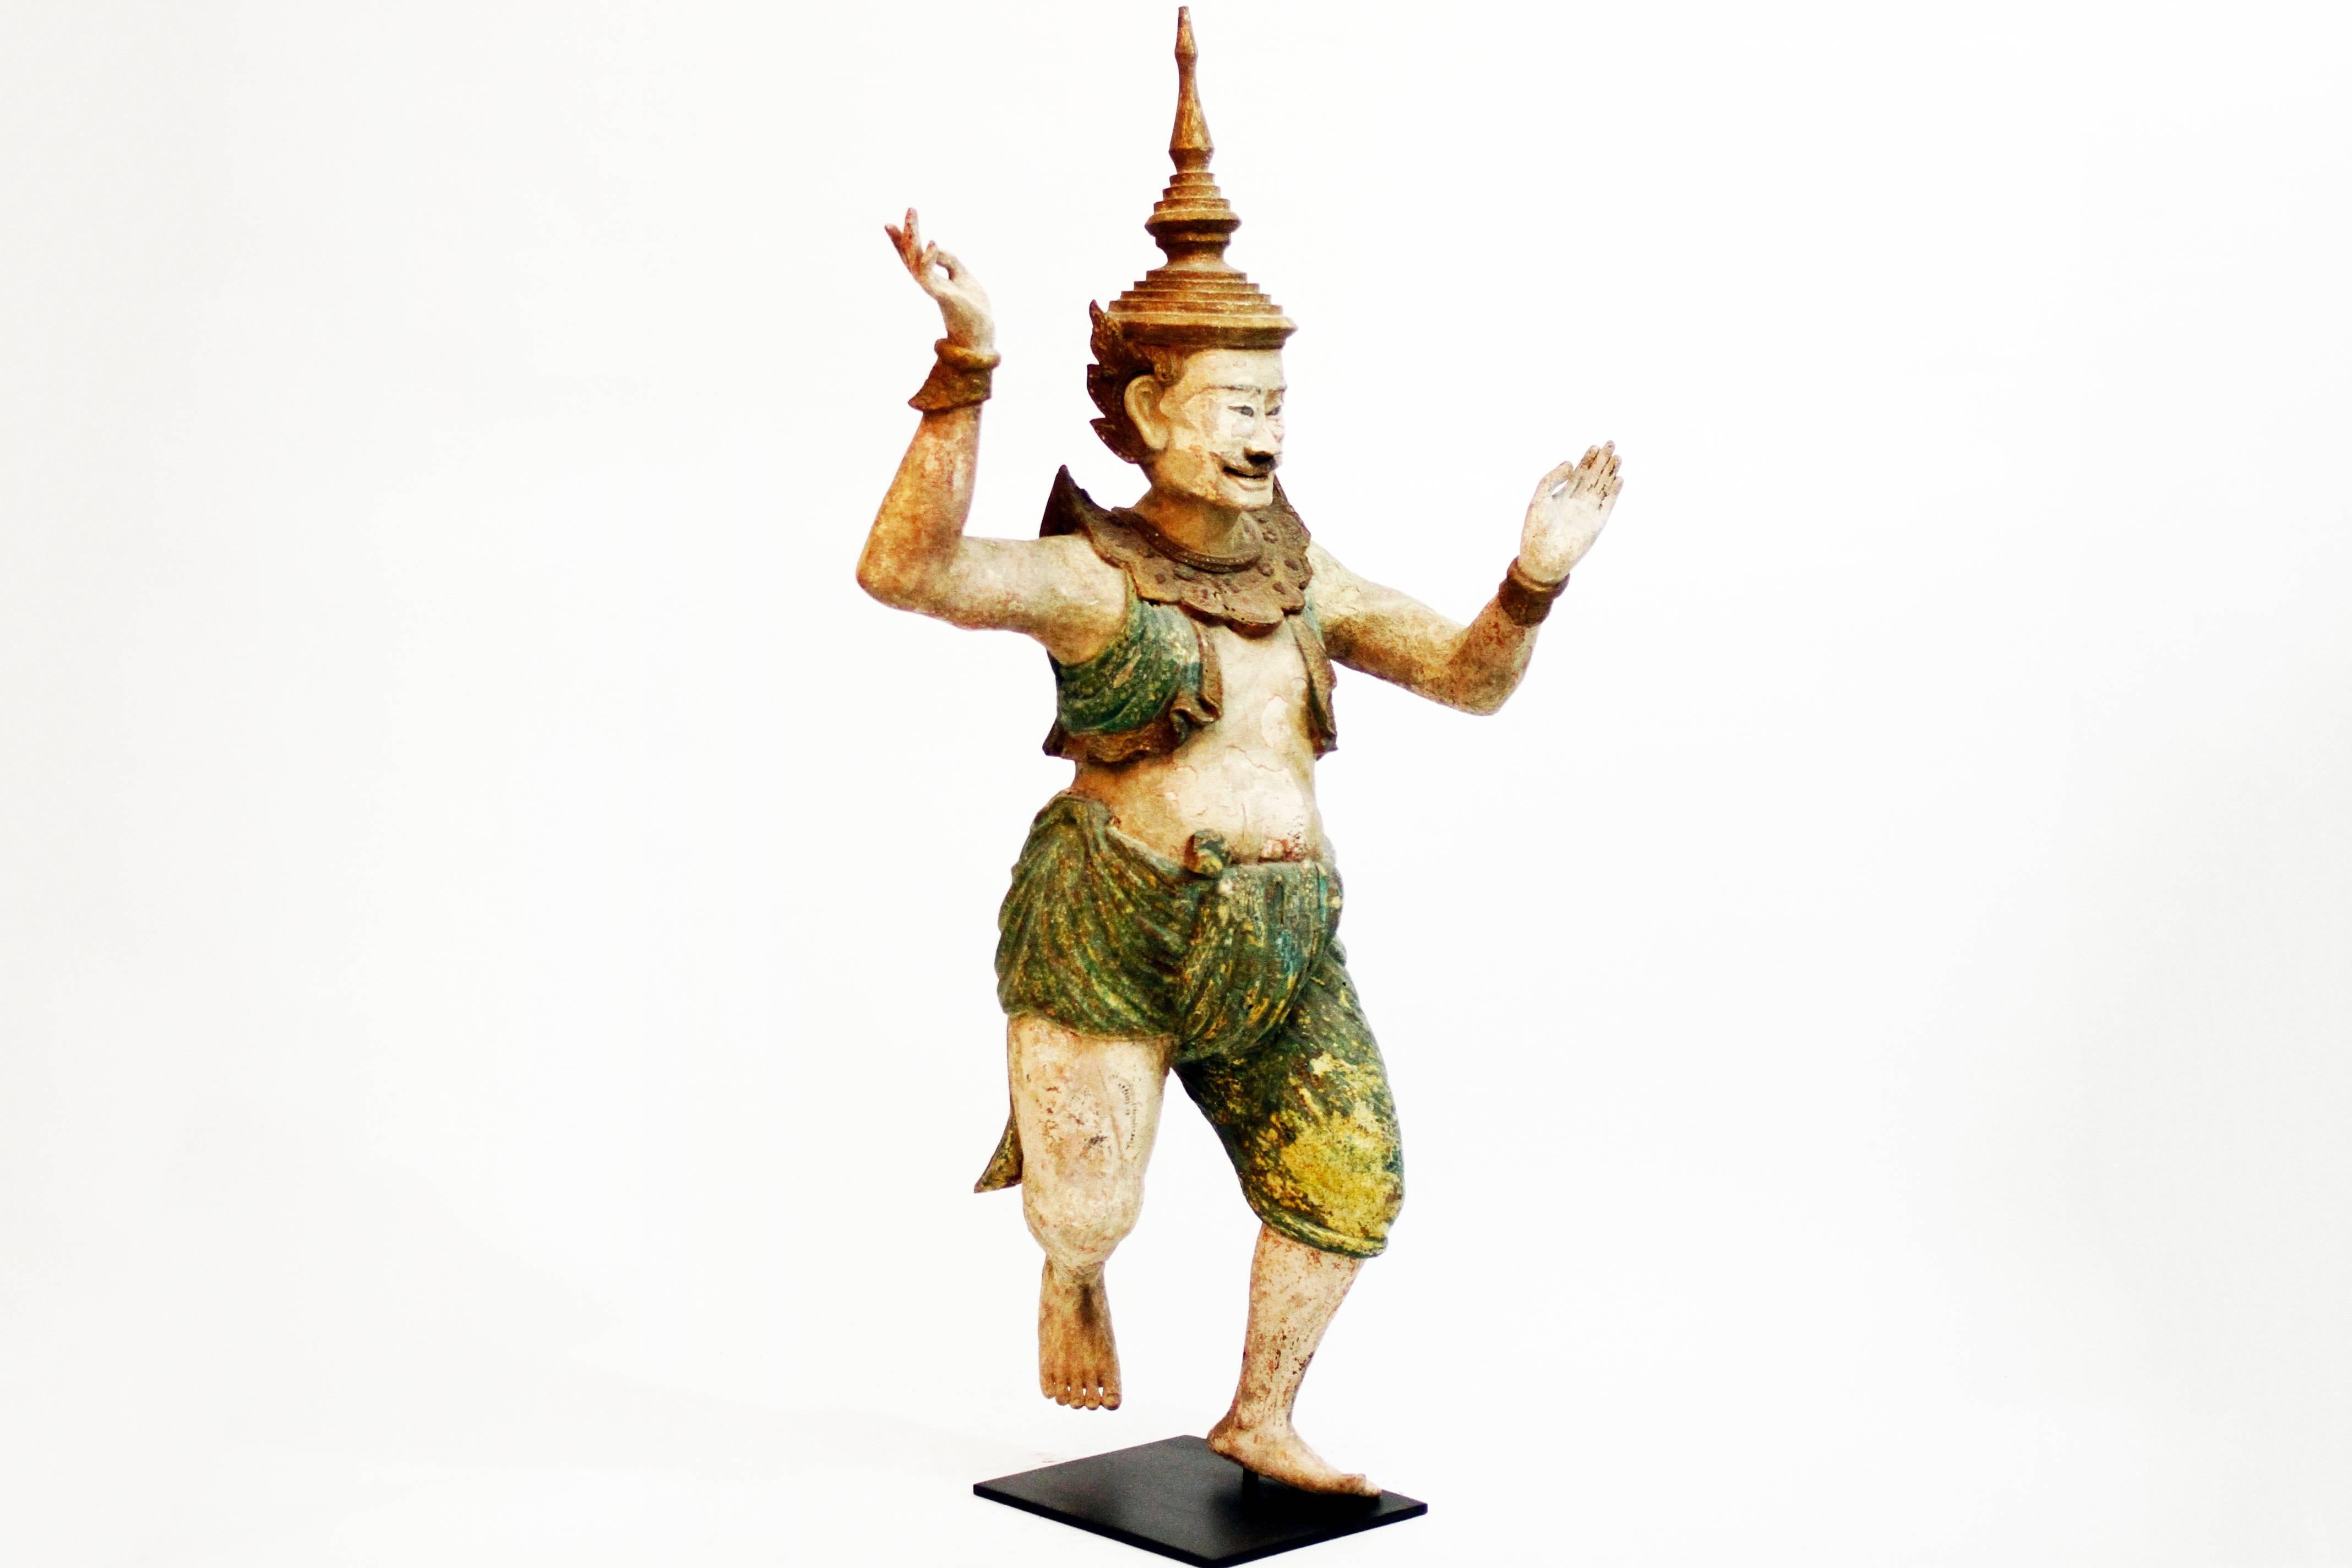 This monumental hand-carved Burmese Nat is from the early 19th century Rangoon, Myanmar and is made from teakwood. Nats are spirits worshiped in Burma (or Myanmar) in conjunction with Buddhism. They are divided between the 37 Great Nats and are